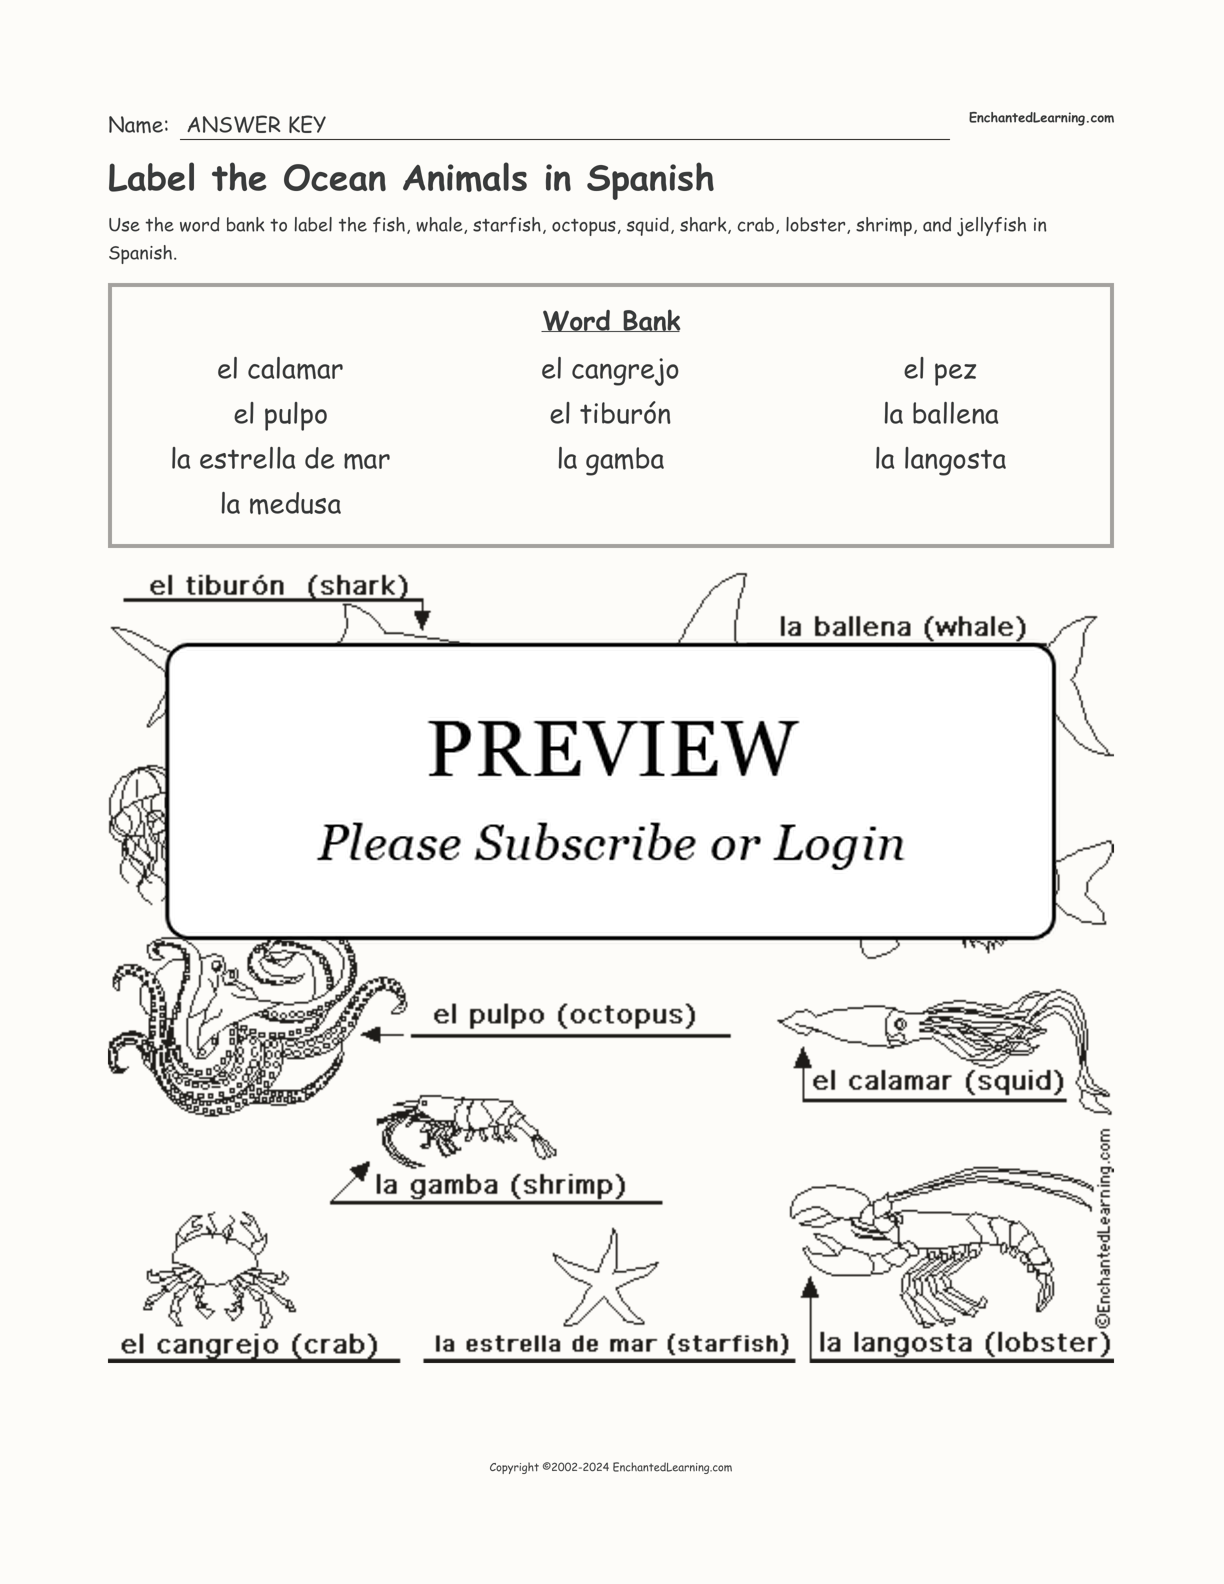 Label the Ocean Animals in Spanish interactive worksheet page 2